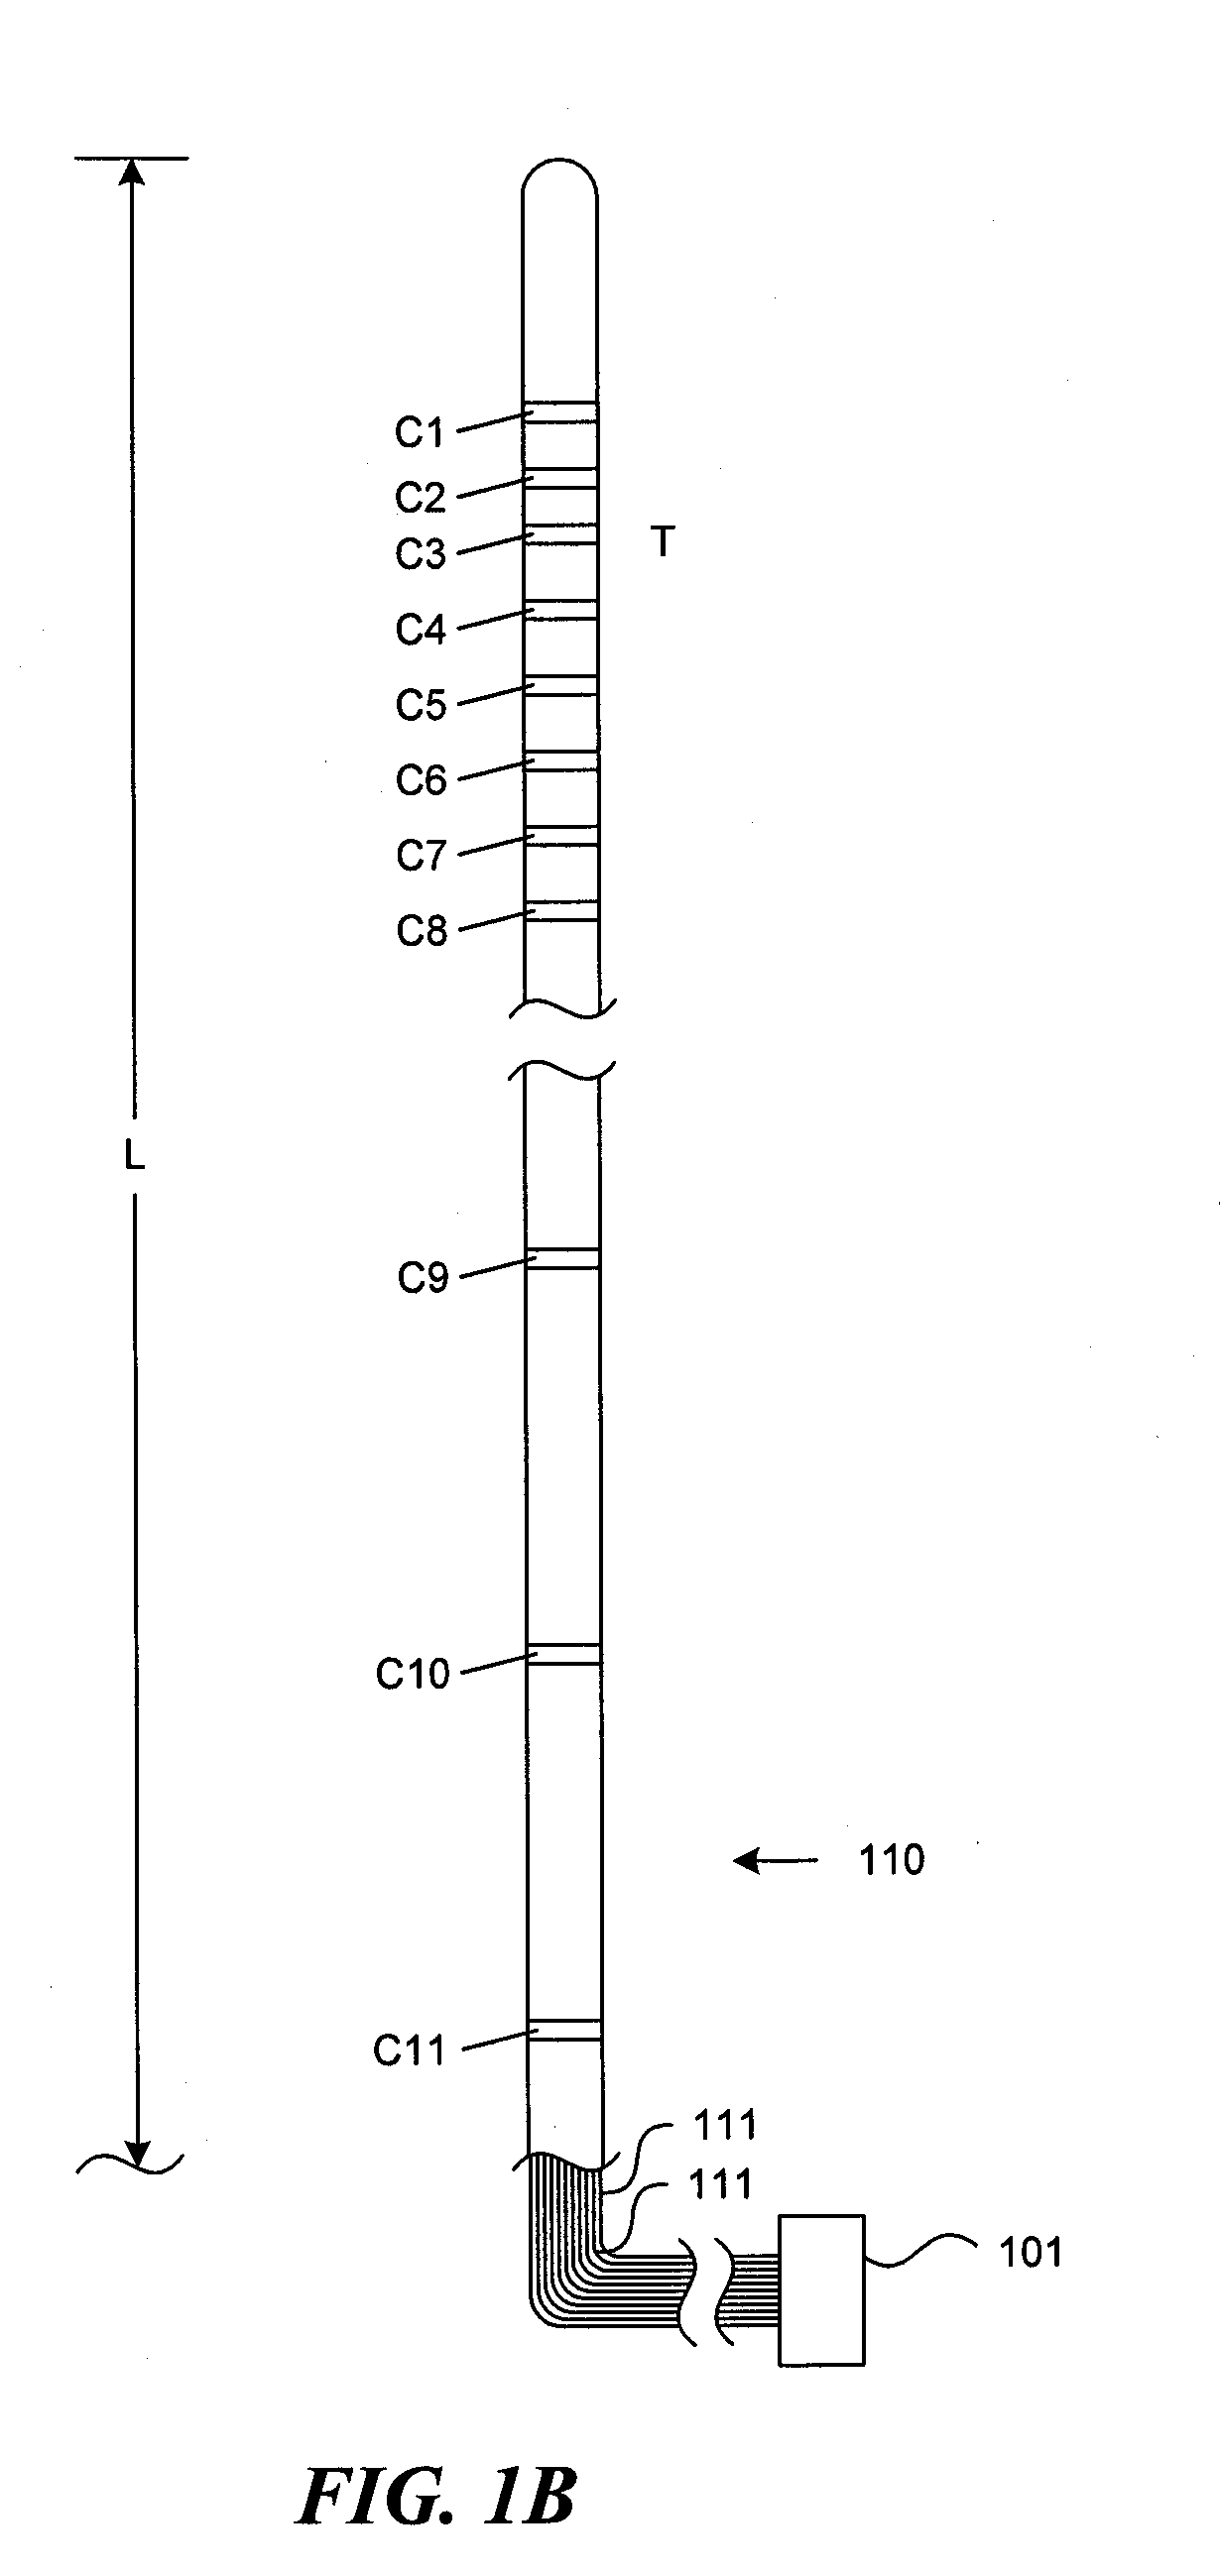 Systems and methods for adjusting electrical therapy based on impedance changes